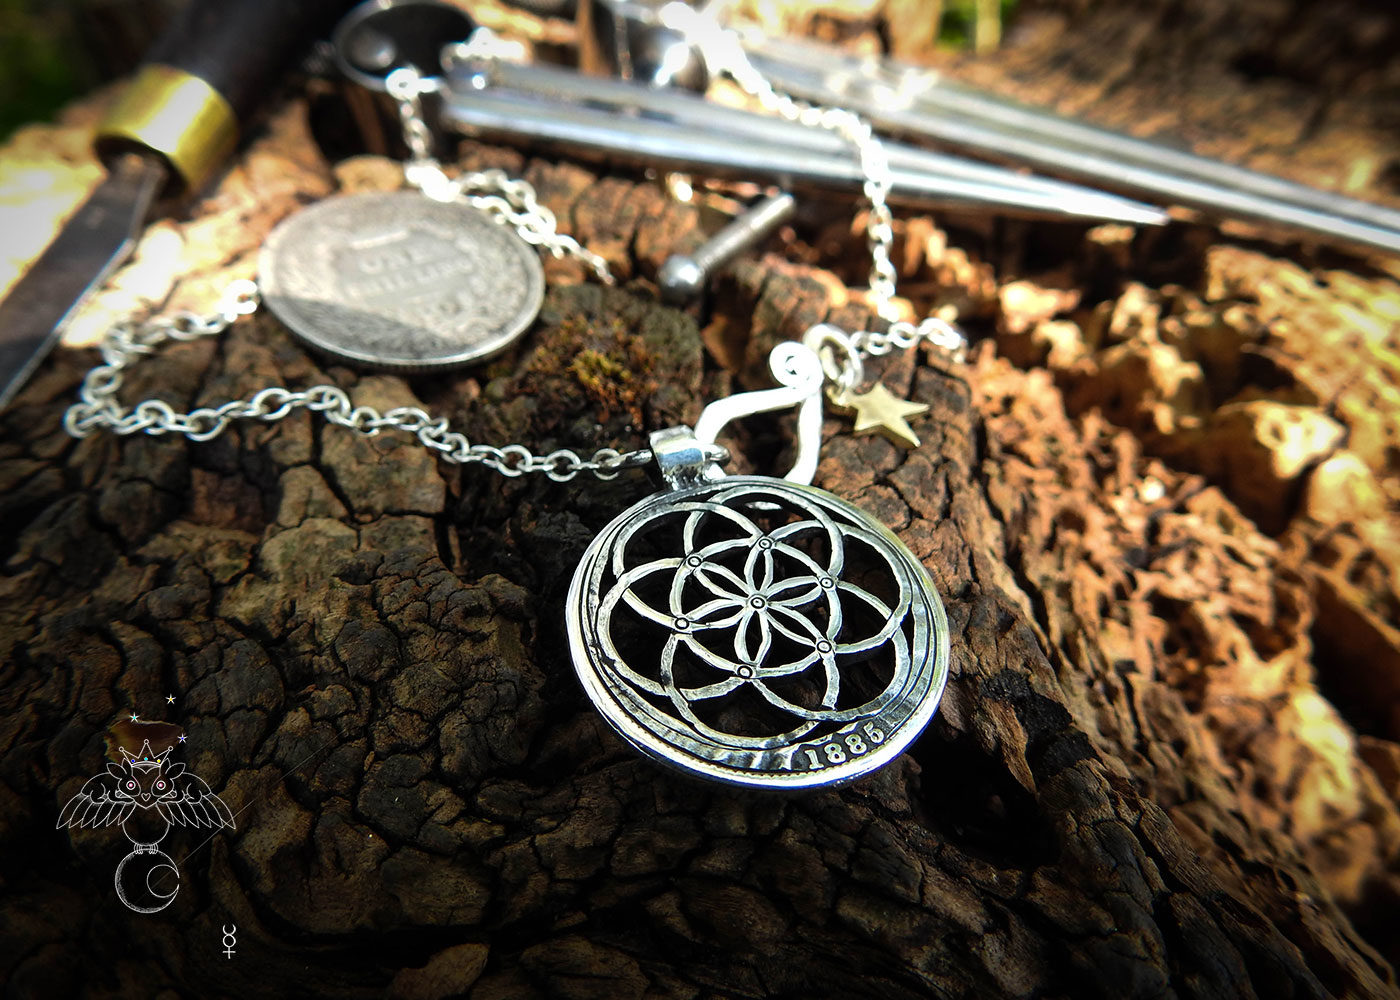 Sacred geometry jewellery - Handcrafted and recycled silver Victorian shilling.